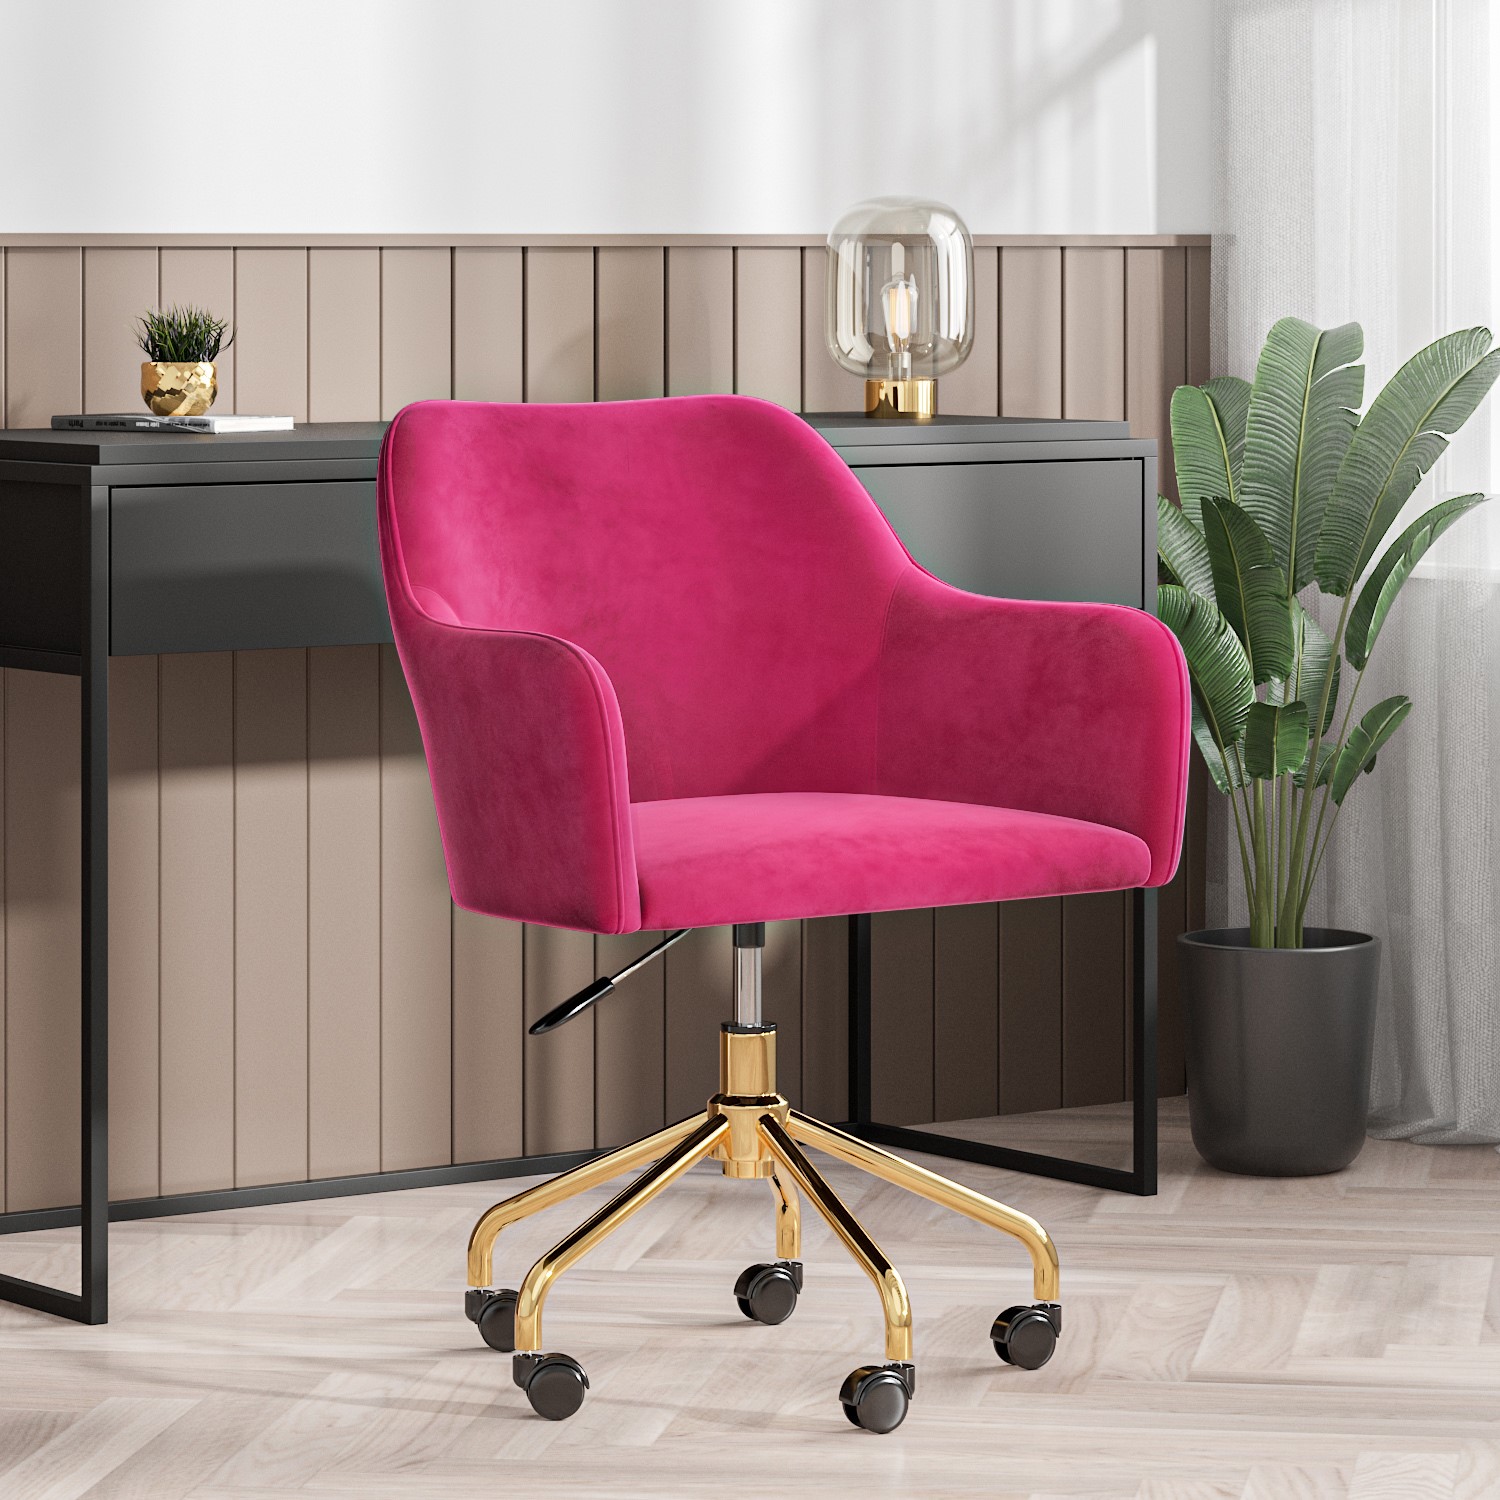 Marley Hot Pink Velvet Office Chair with Gold Legs